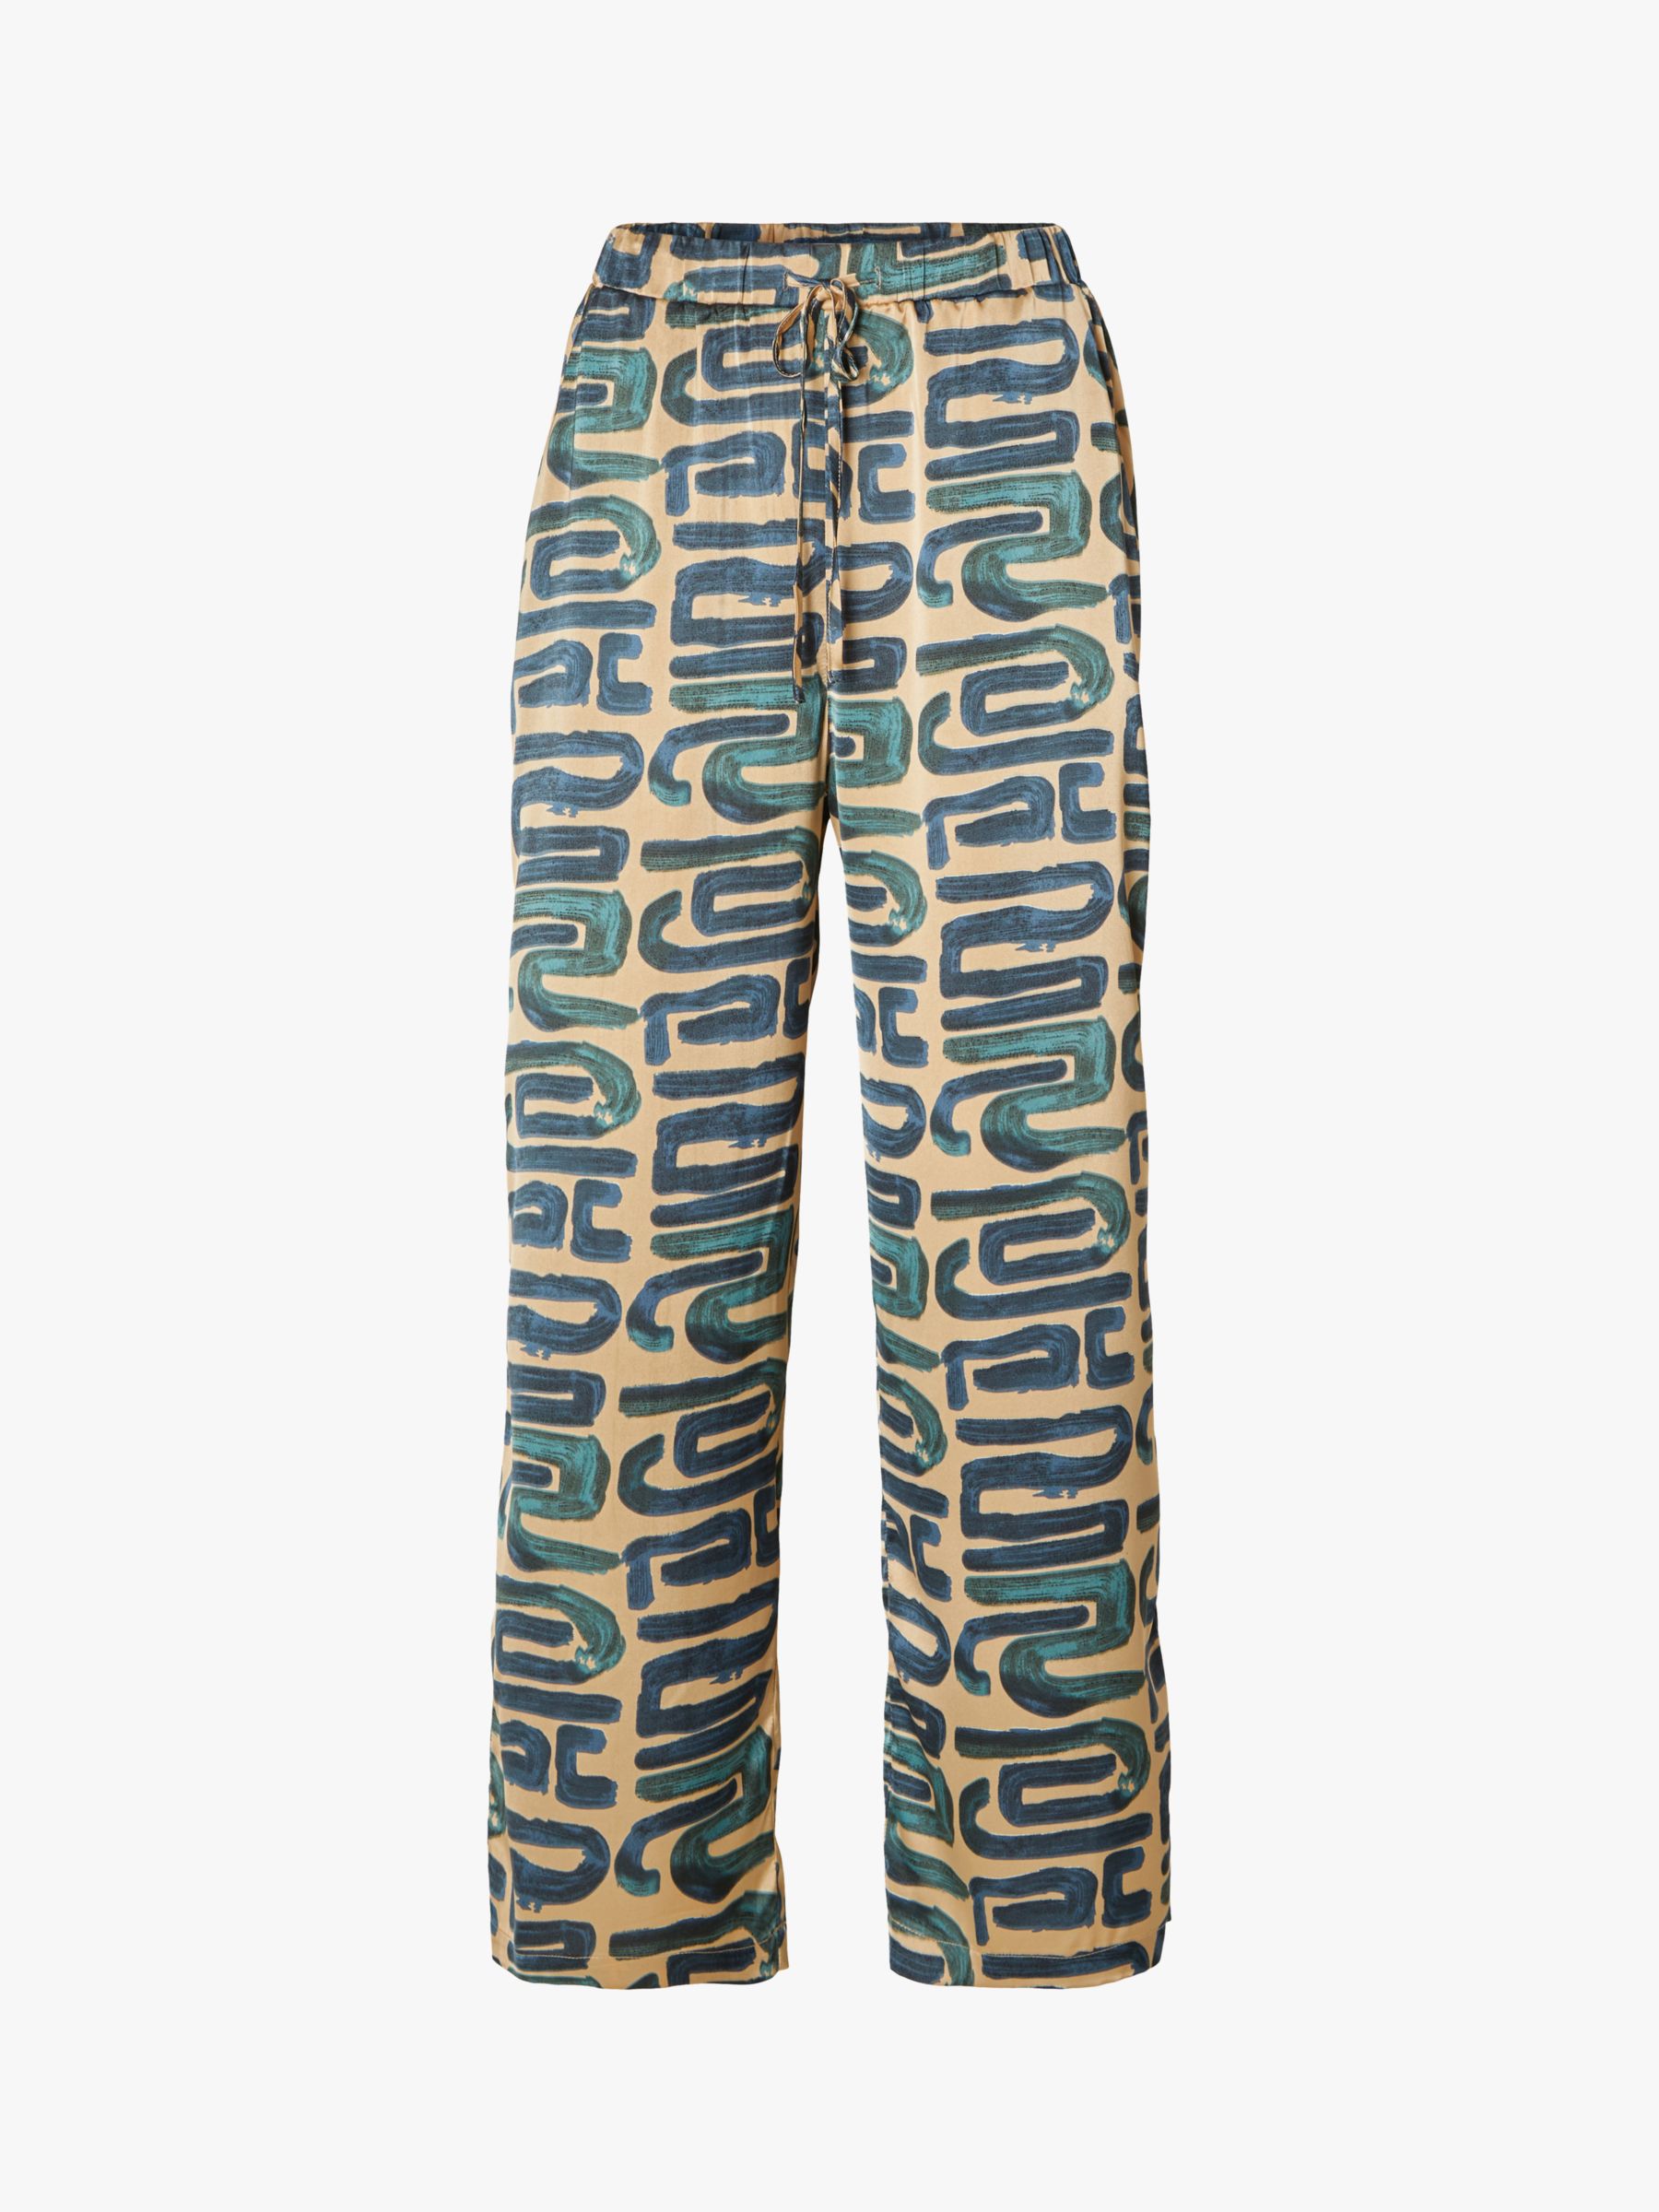 SELECTED FEMME Abstract Print Trousers, Almond Buff at John Lewis ...